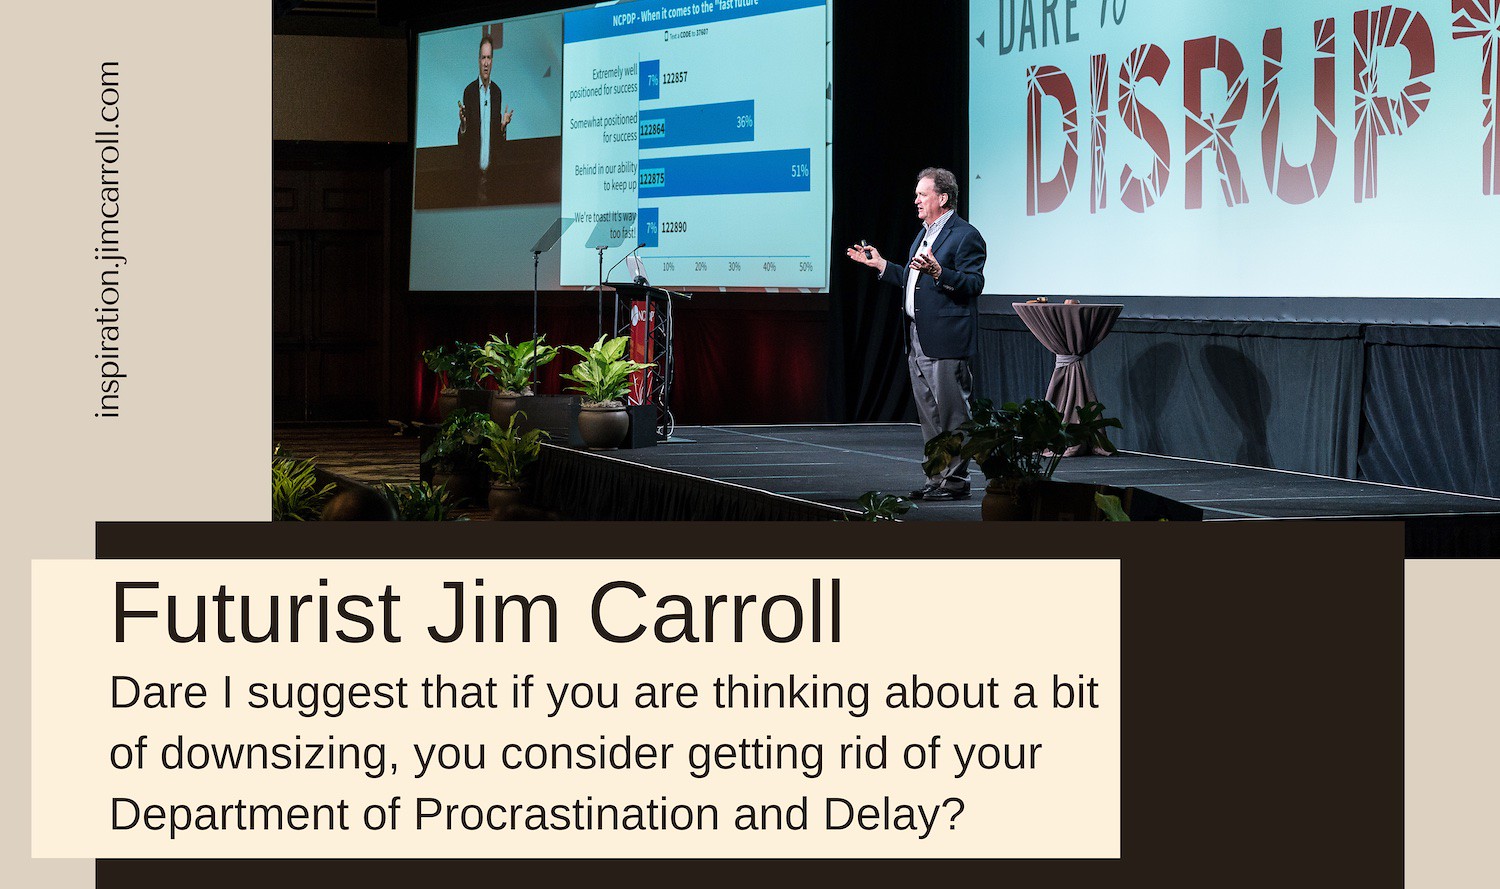 "Dare I suggest that if you are thinking about a bit of downsizing, you consider getting rid of your Department of Procrastination and Delay?" - Futurist Jim Carroll